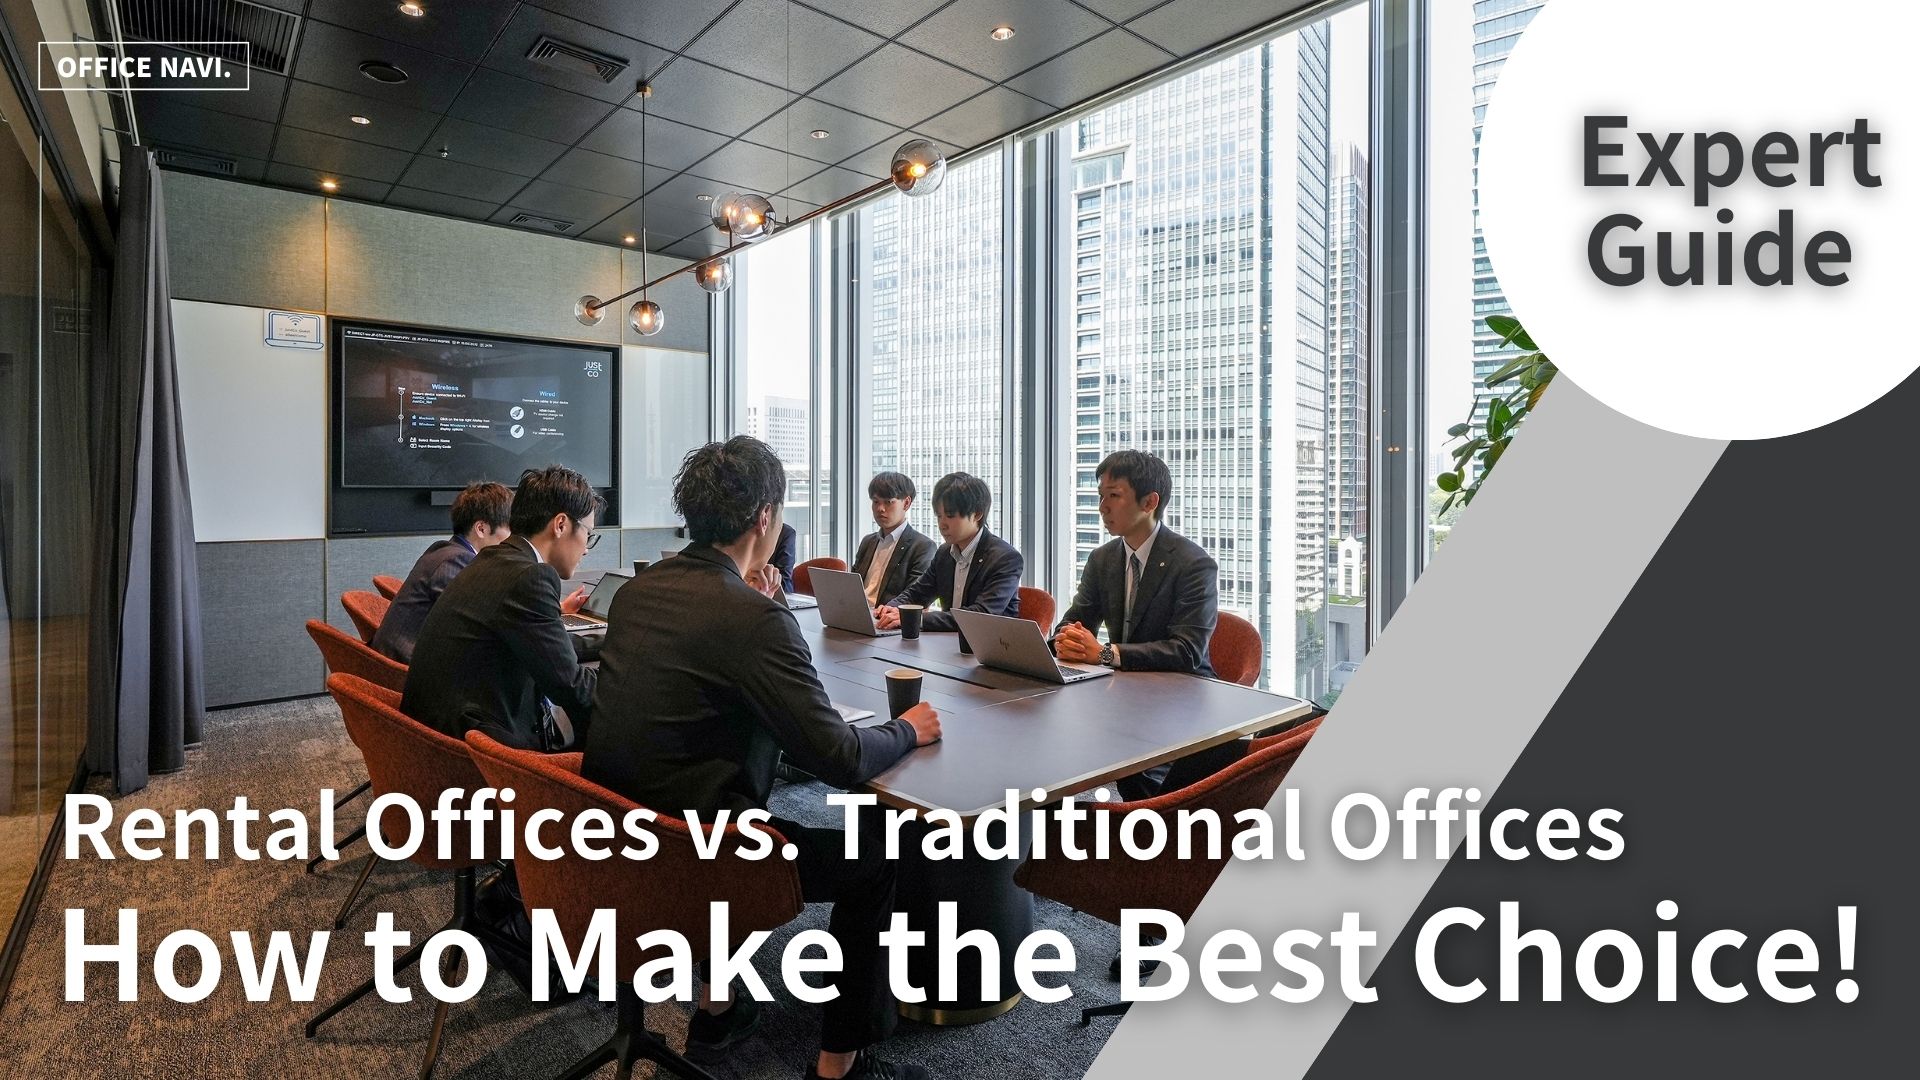 Rental Offices vs. Traditional Offices: A Expert Guide to Their Pros, Cons, and How to Make the Best Choice!